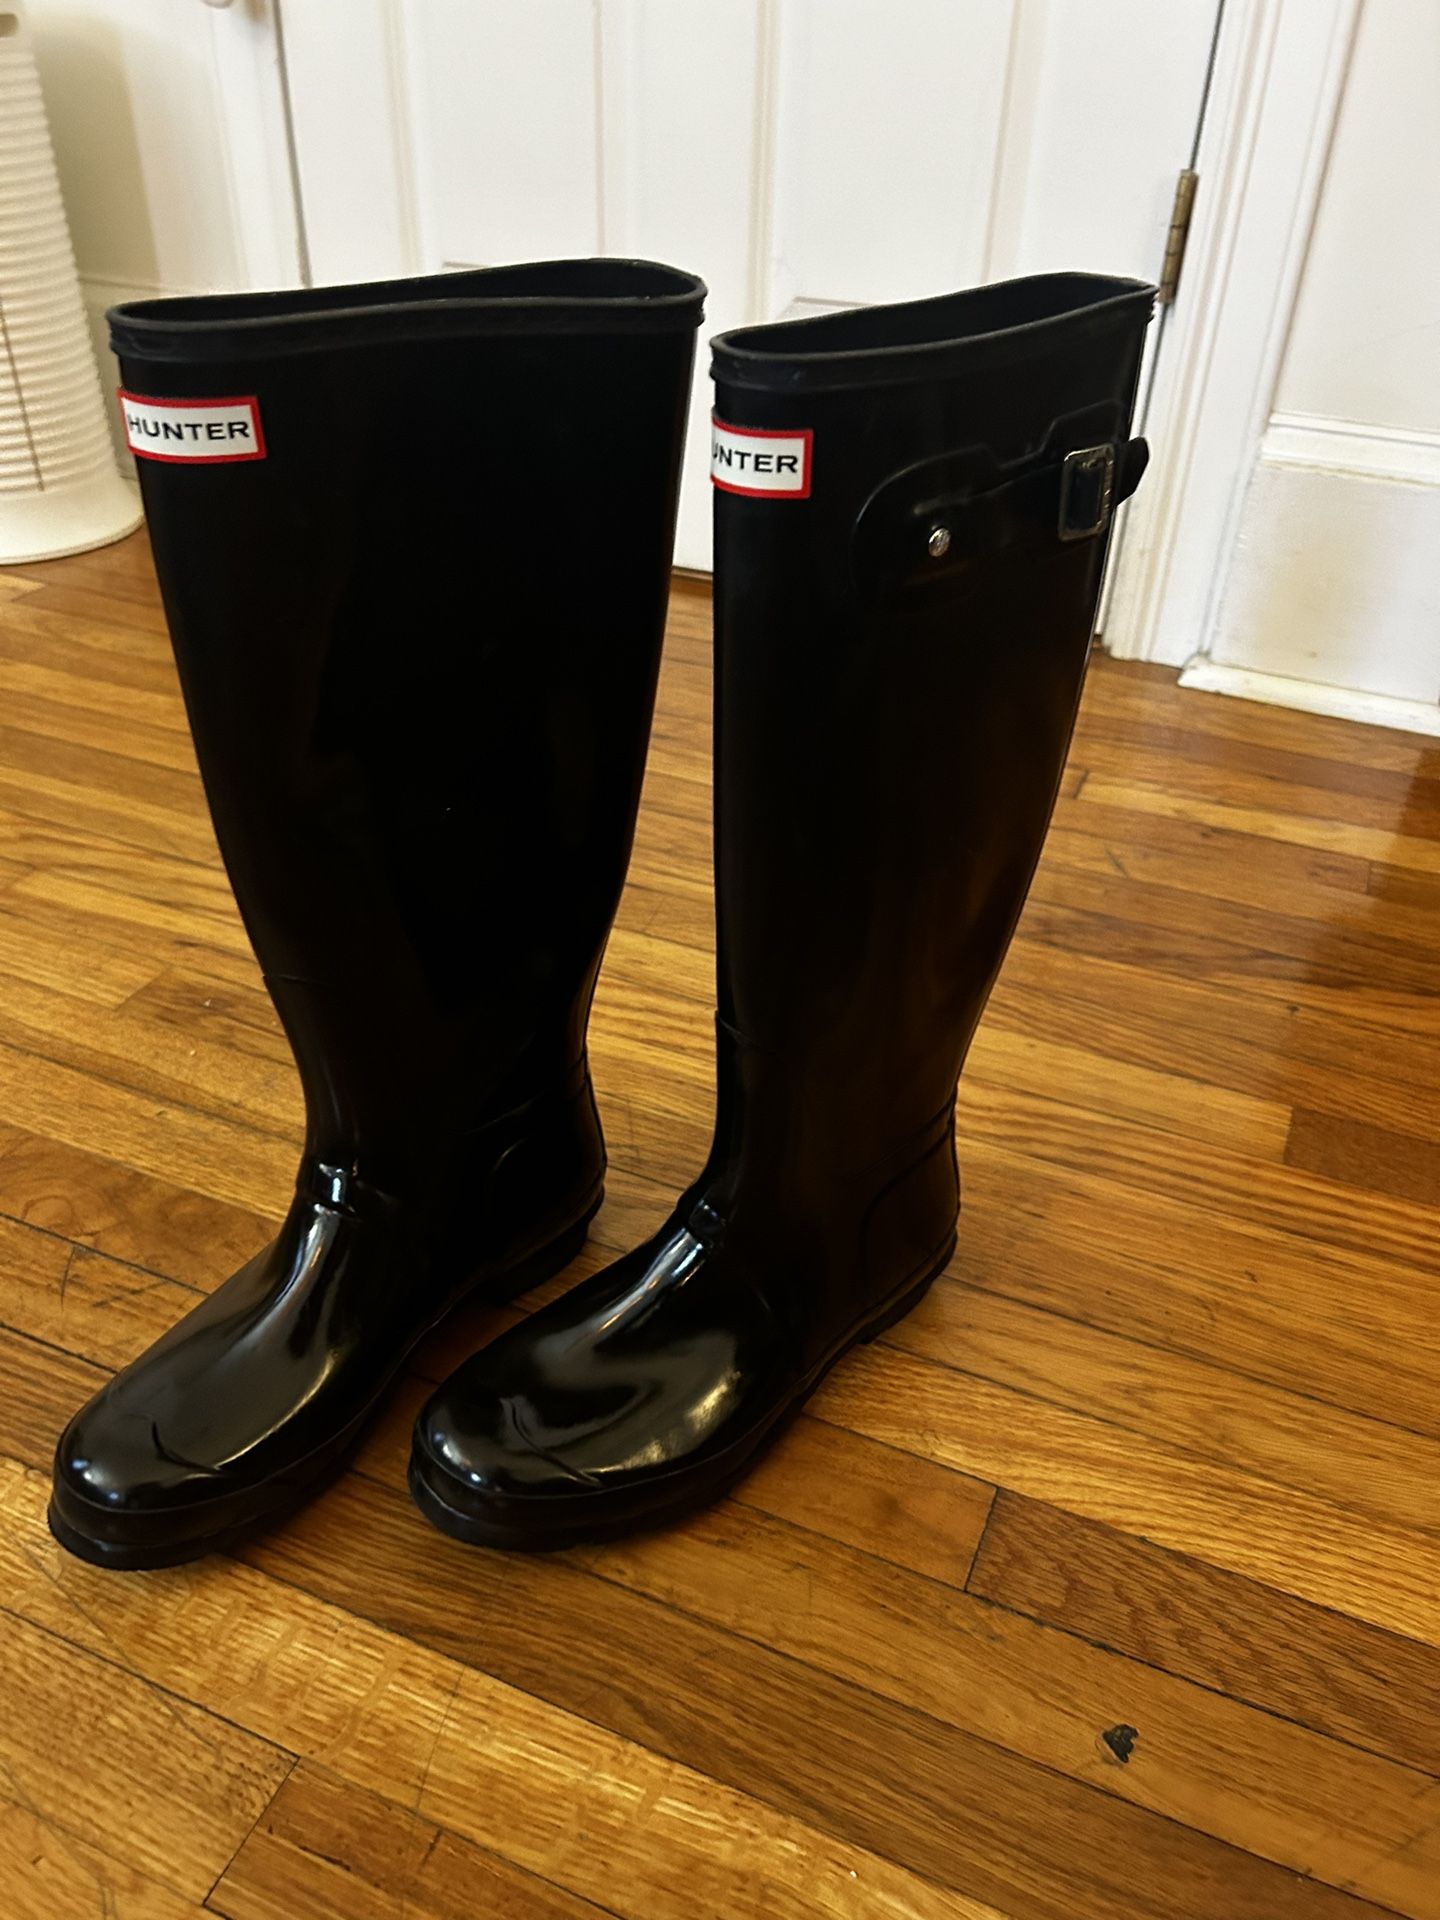 *Barely Worn* Tall Hunter Rain Boots in Glossy Black - Women’s size 9